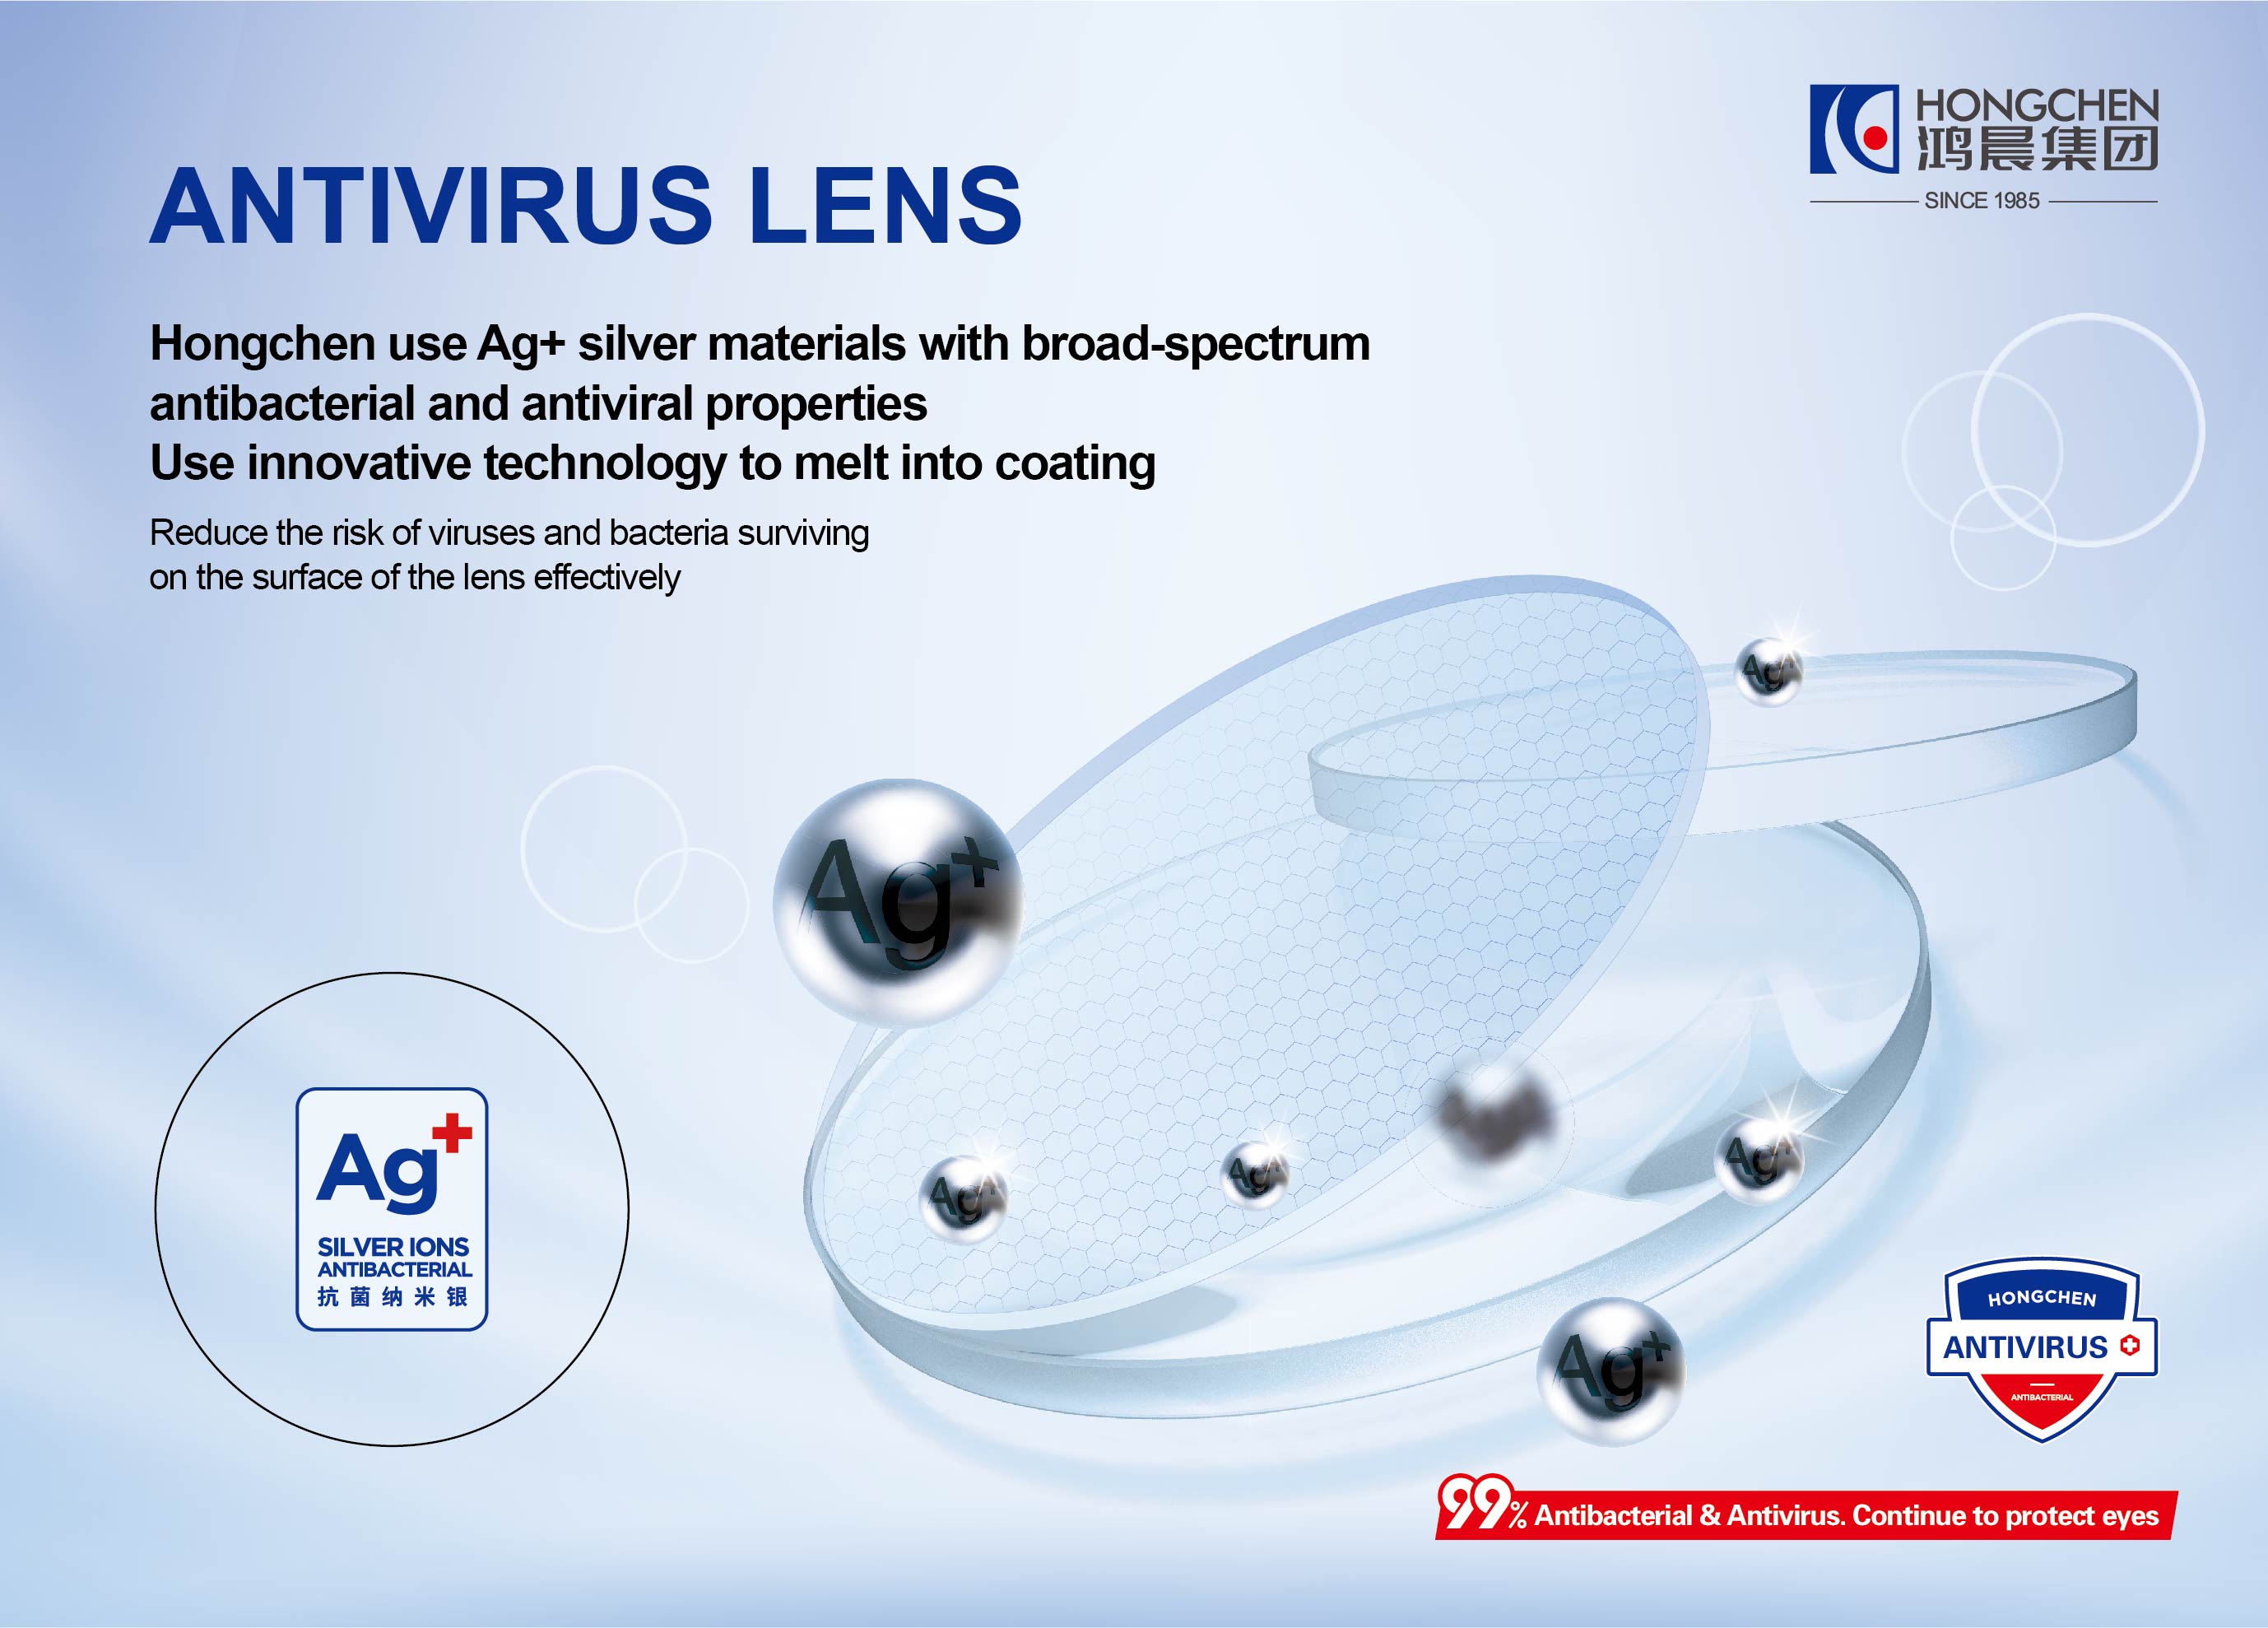 Antivirus lens has been certified by many authoritative testing Labs all over the world!